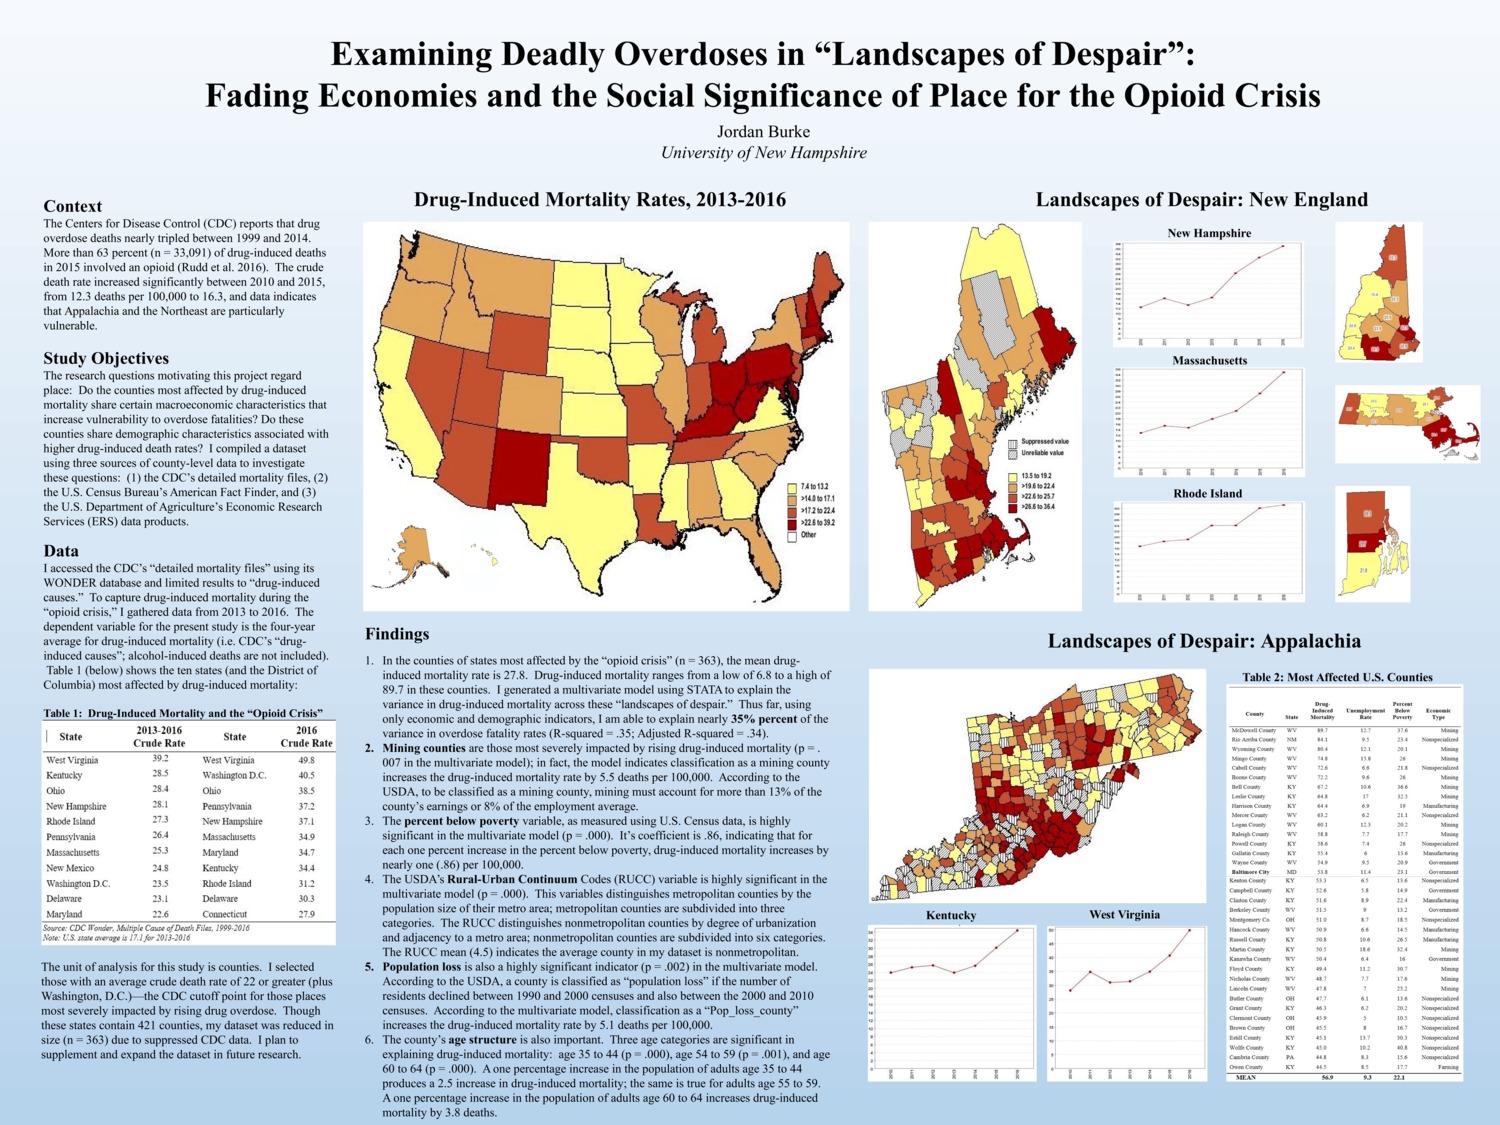 Examining Deadly Overdoses In The "Landscapes Of Despair" by jcb1024